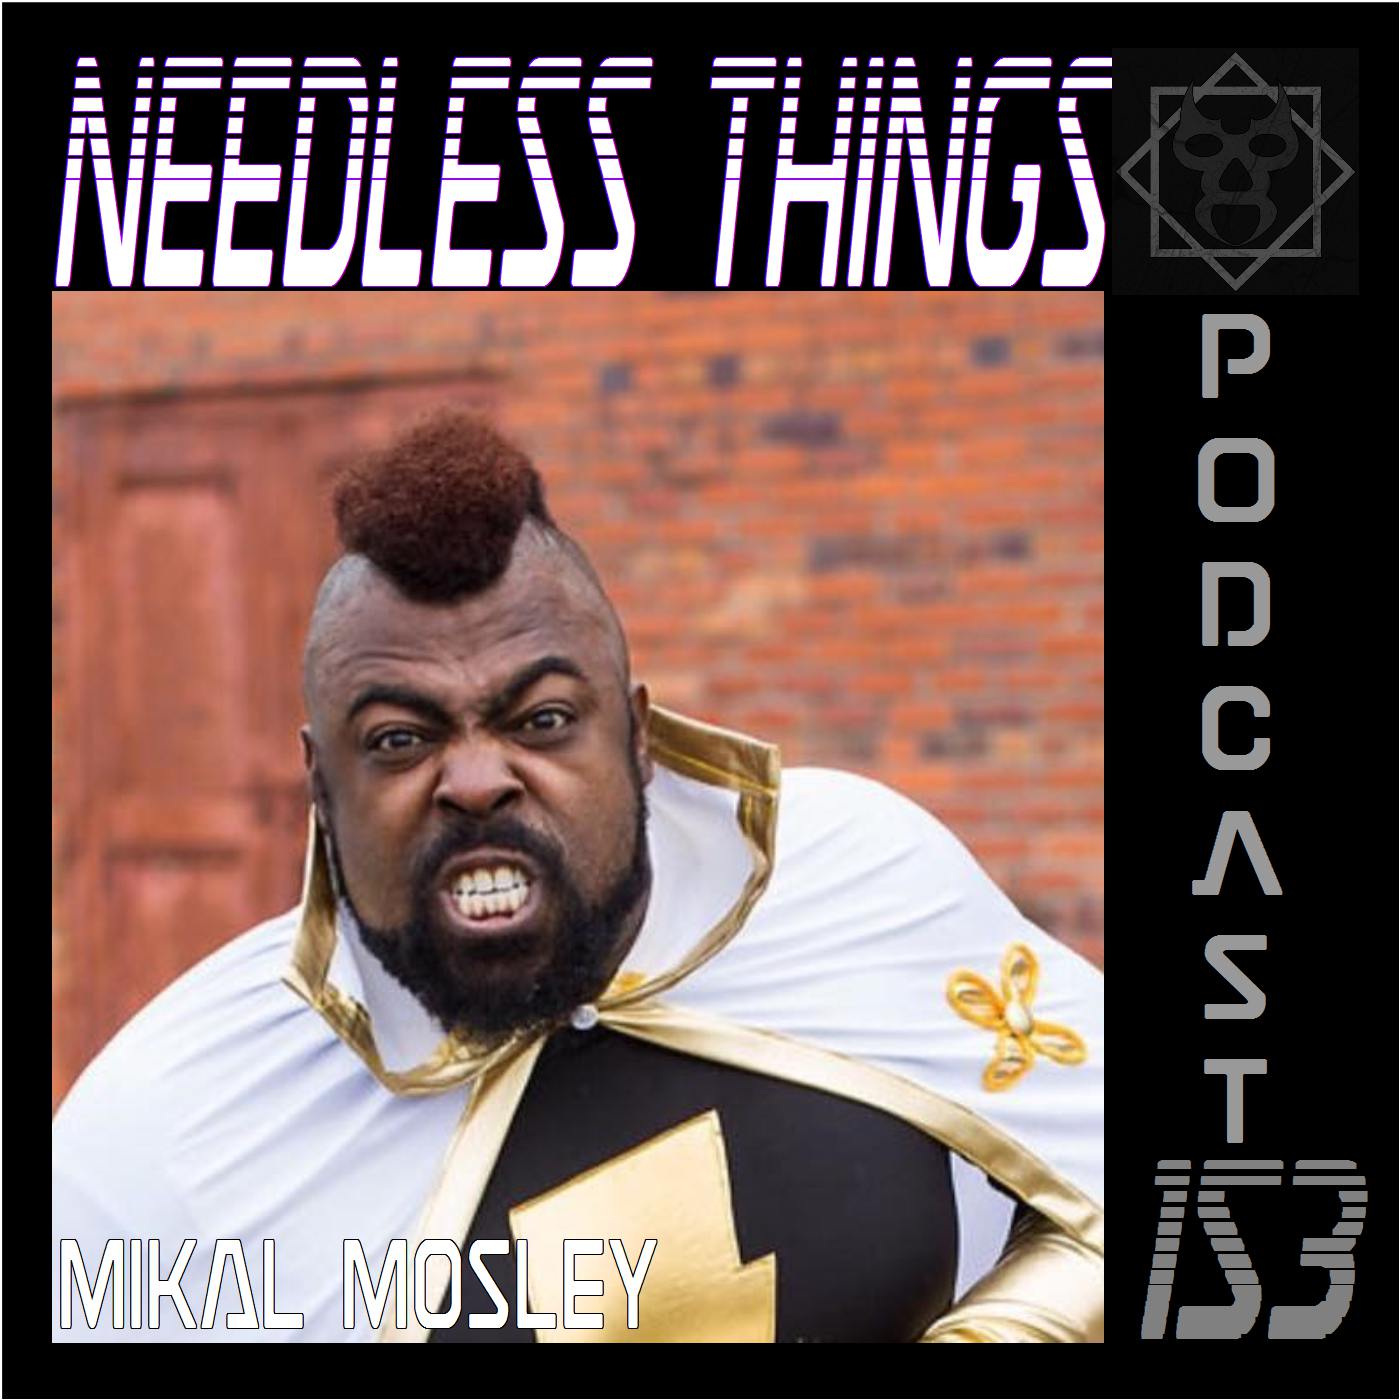 Needless Things Podcast 153 - Mikal Mosley